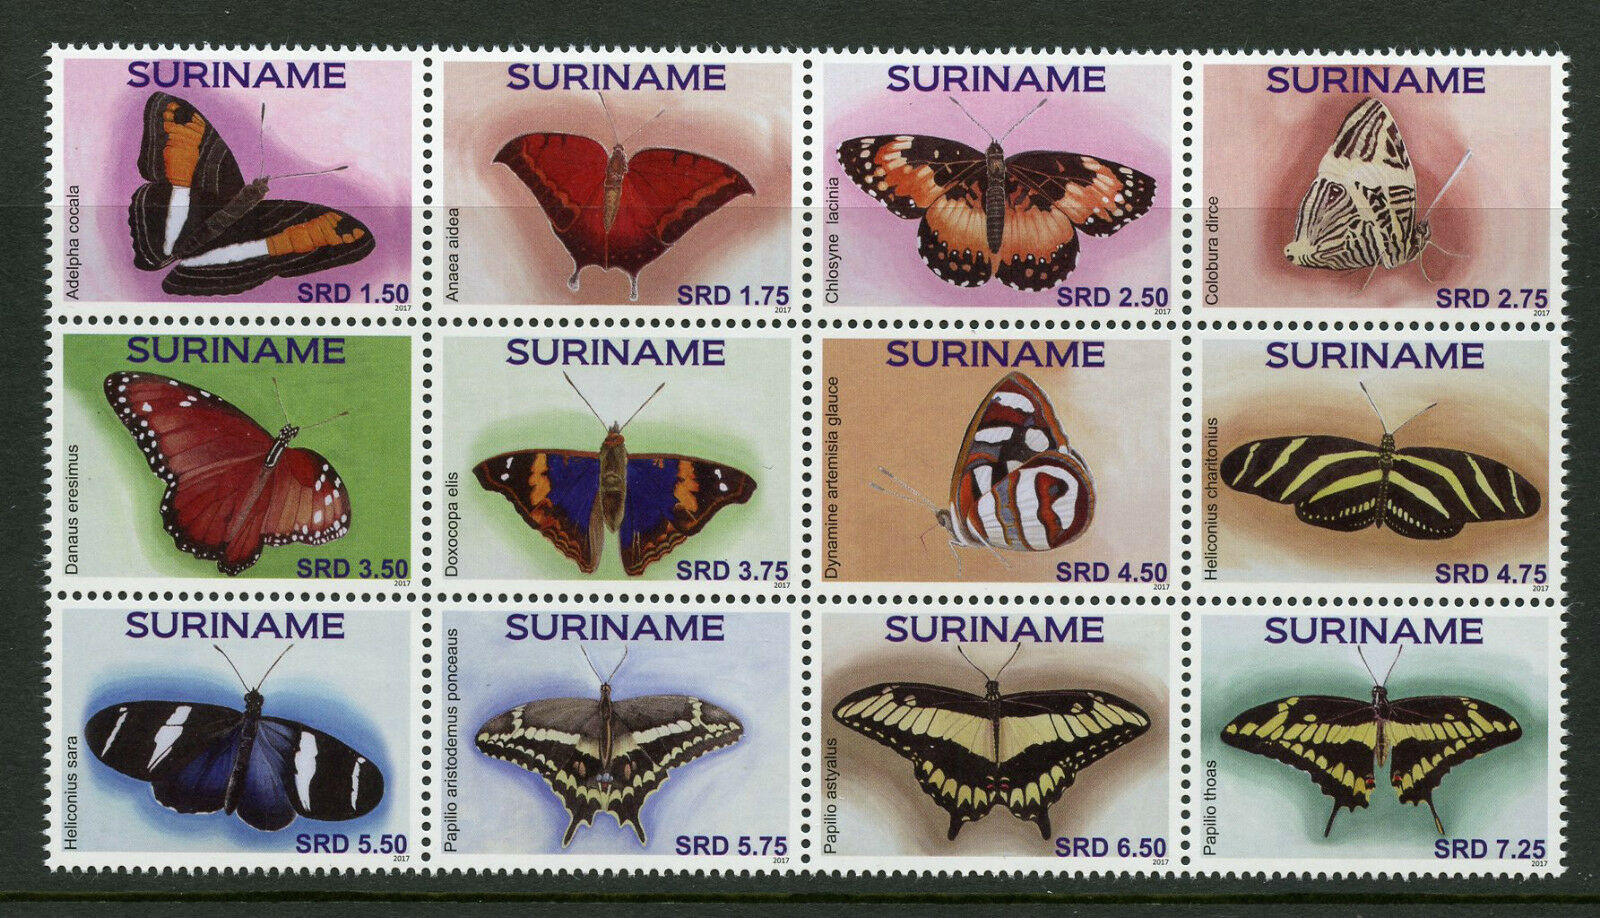 Suriname Butterflies Stamps 2017 MNH Swallowtail Butterfly Insects 12v Block